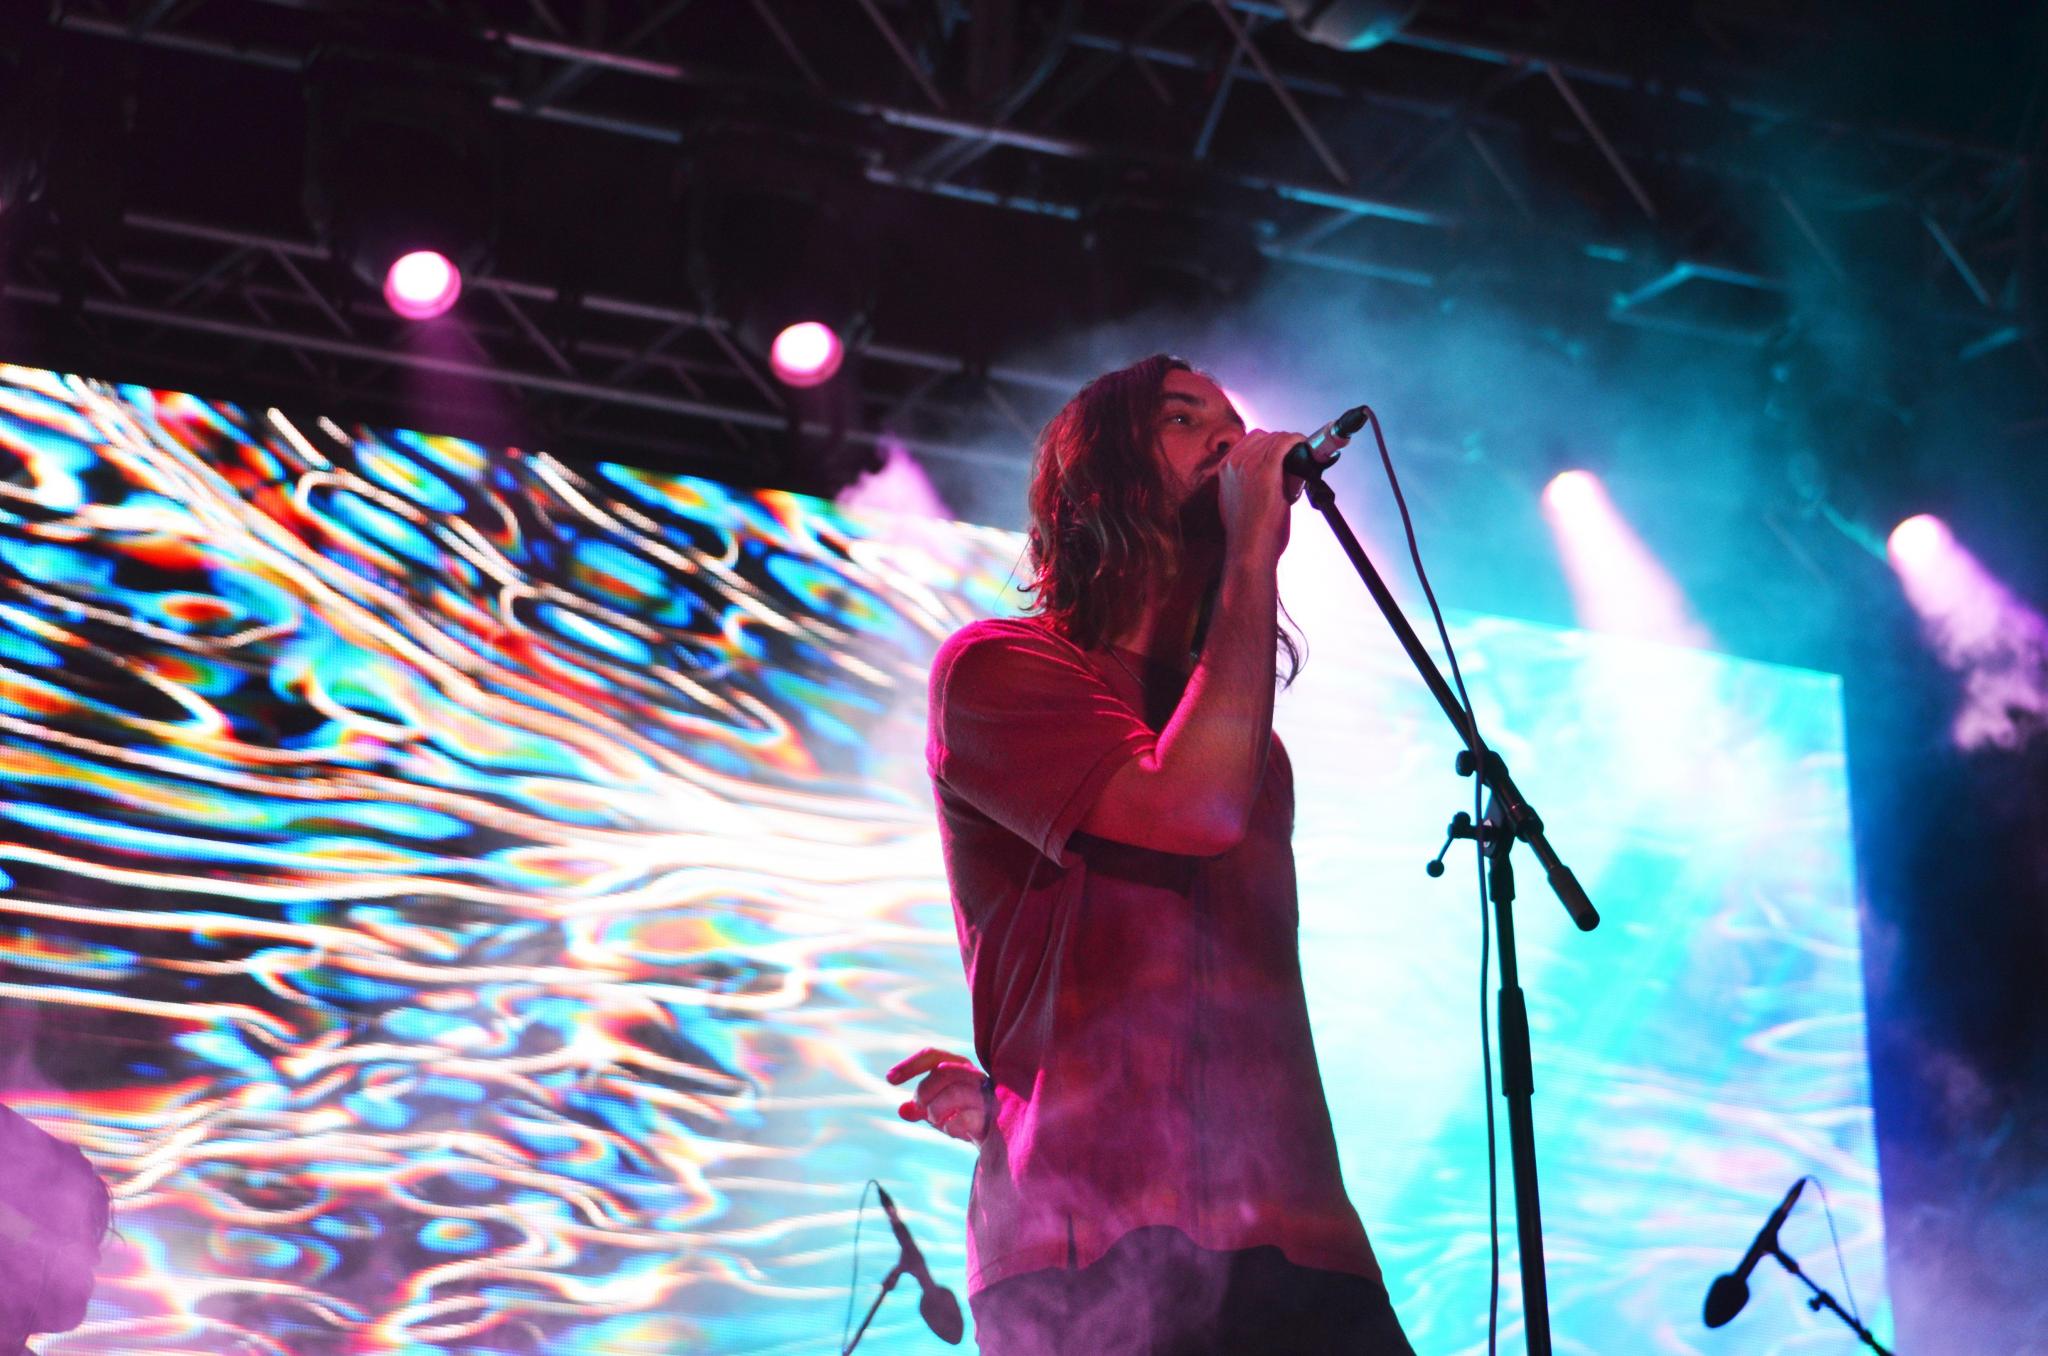 Tame Impala lead singer Kevin Parker, 2018 Float Festival in San Marcos, TX. Photo by Toy Mendez